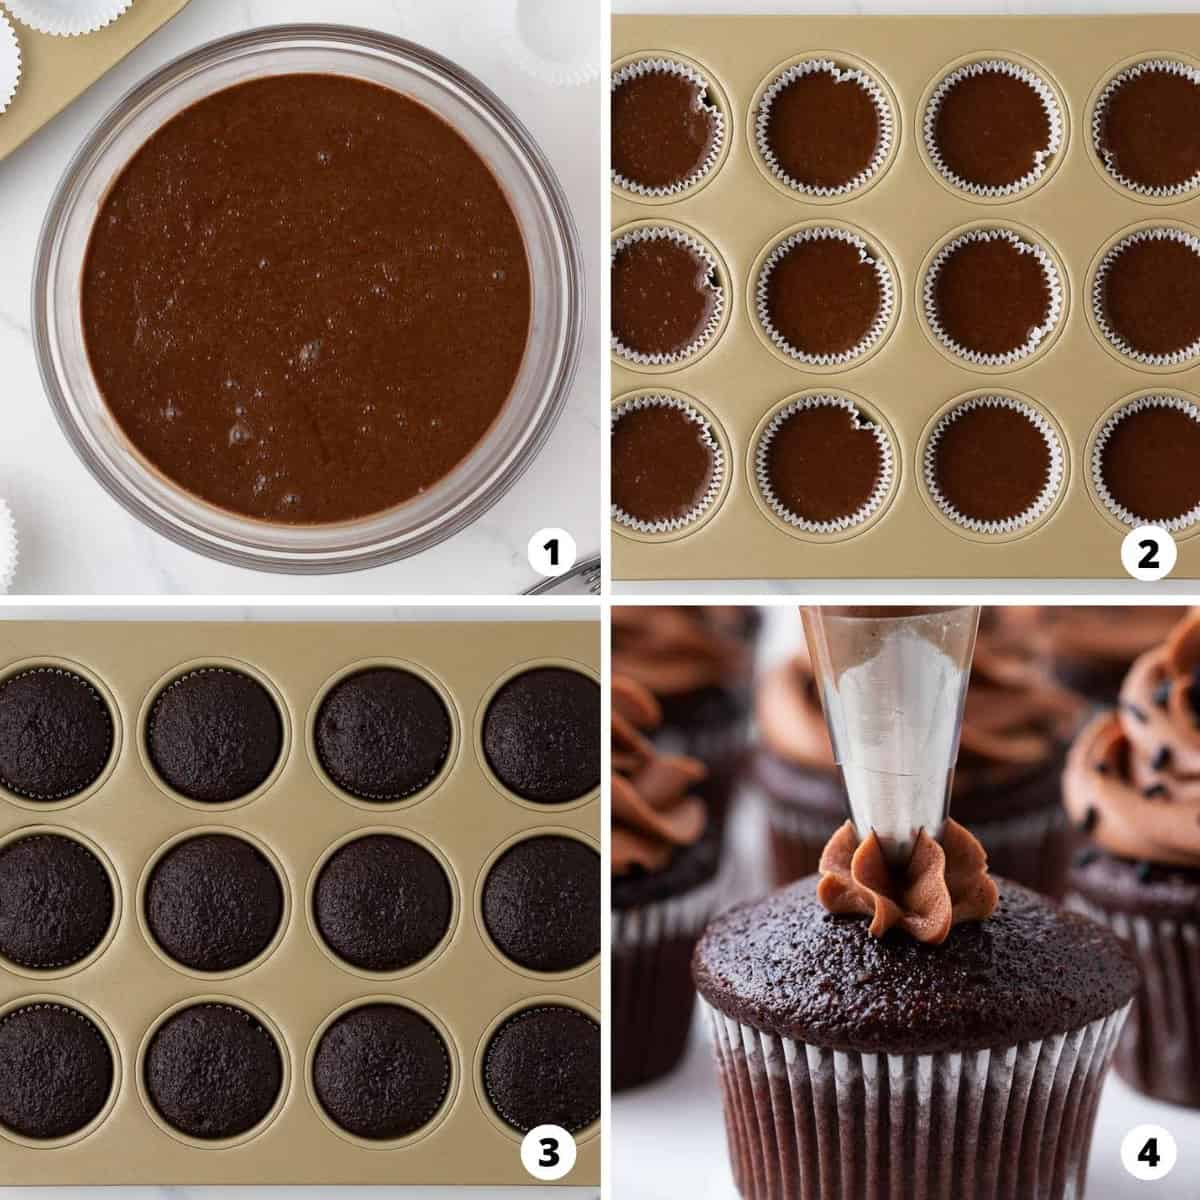 Step by step collage making chocolate cupcakes.